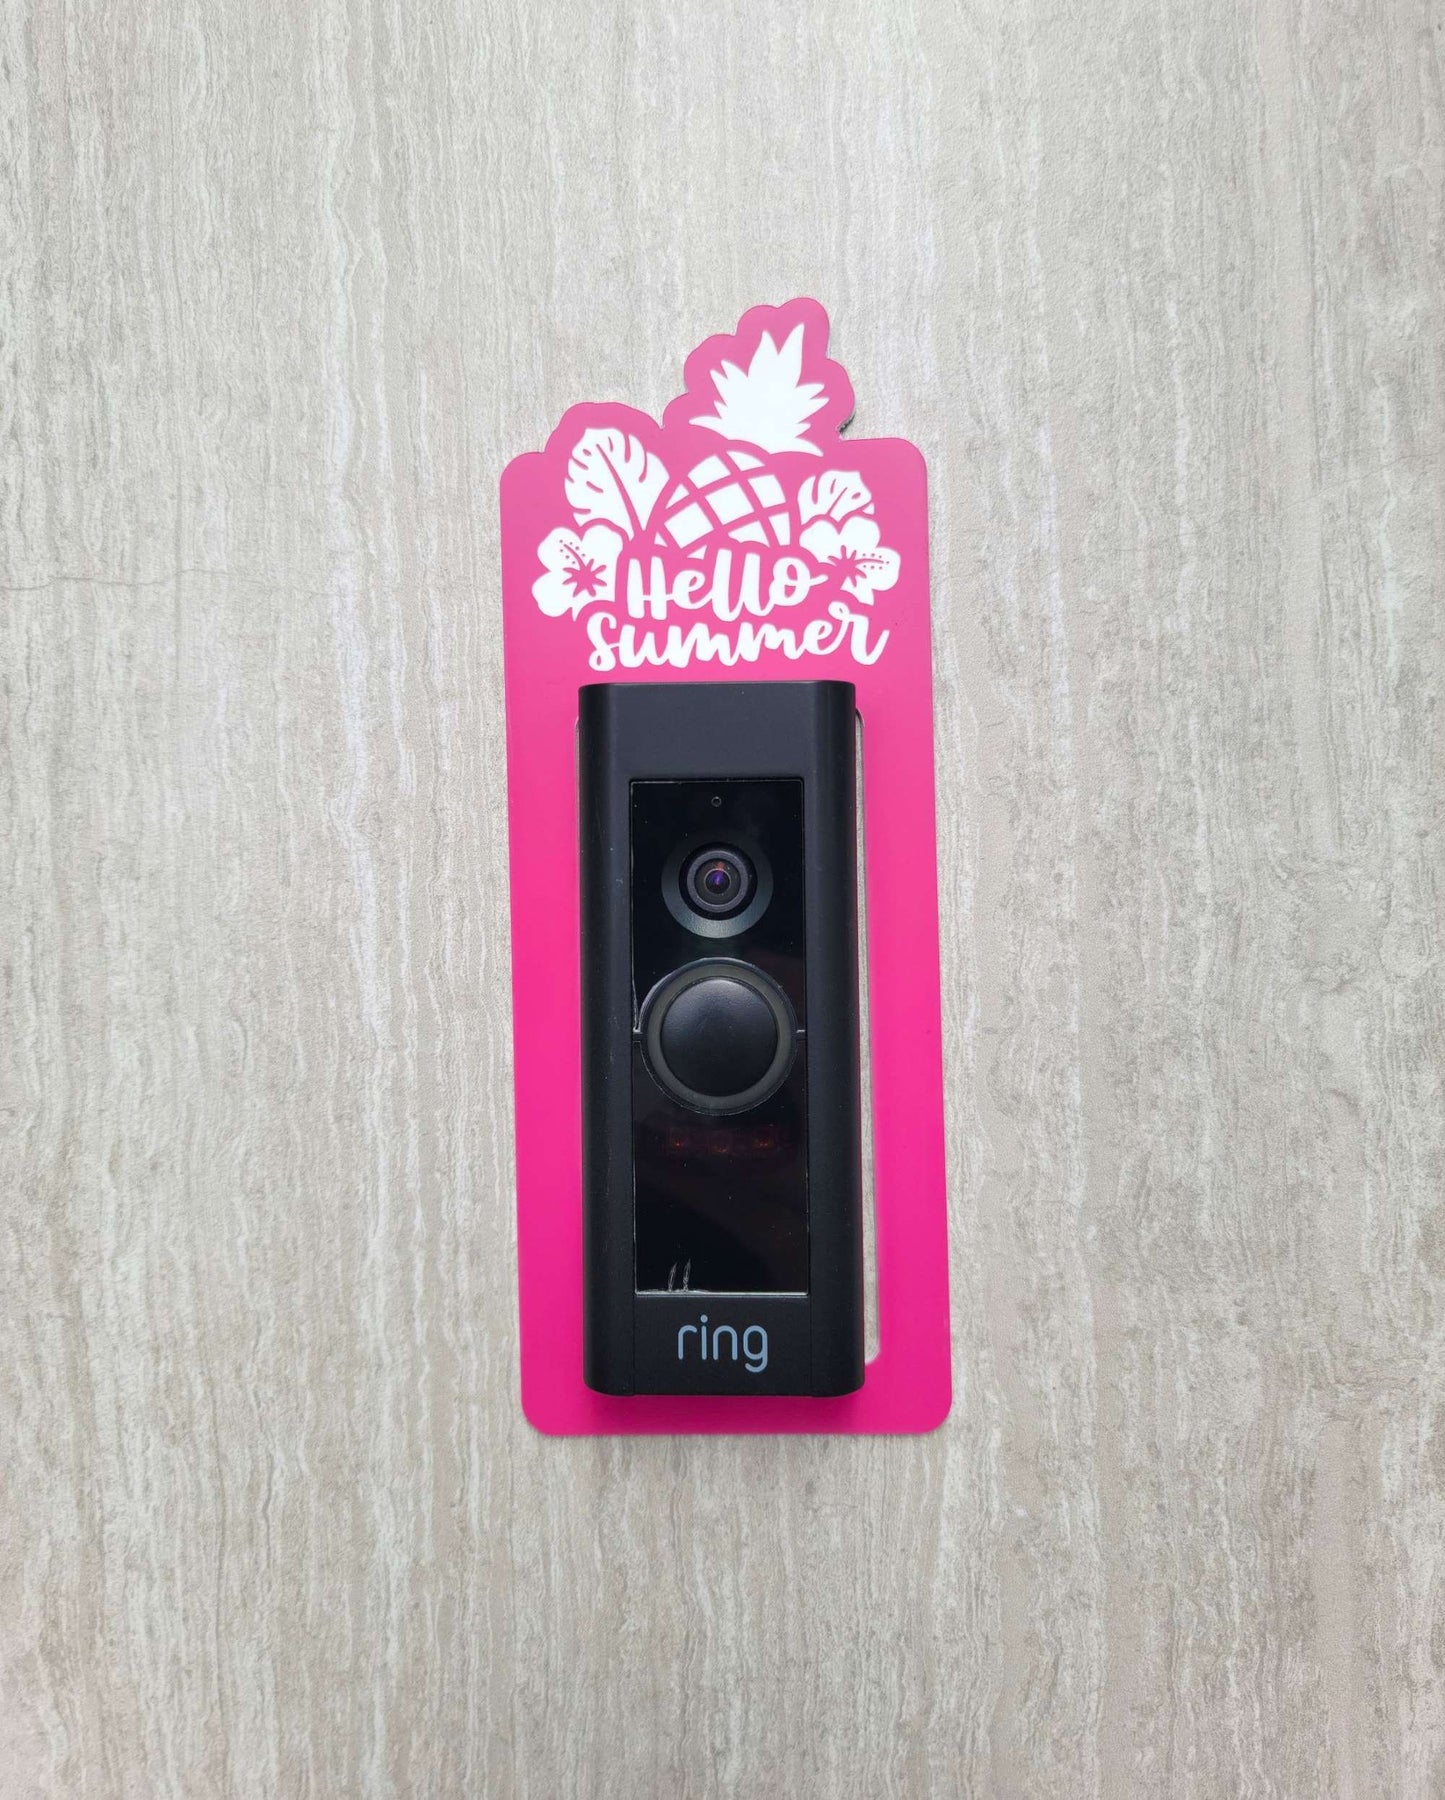 Pink laminate doorbell surround with white pineapple, leaves, and flowers and lettering saying hello summer on ring doorbell and gray background